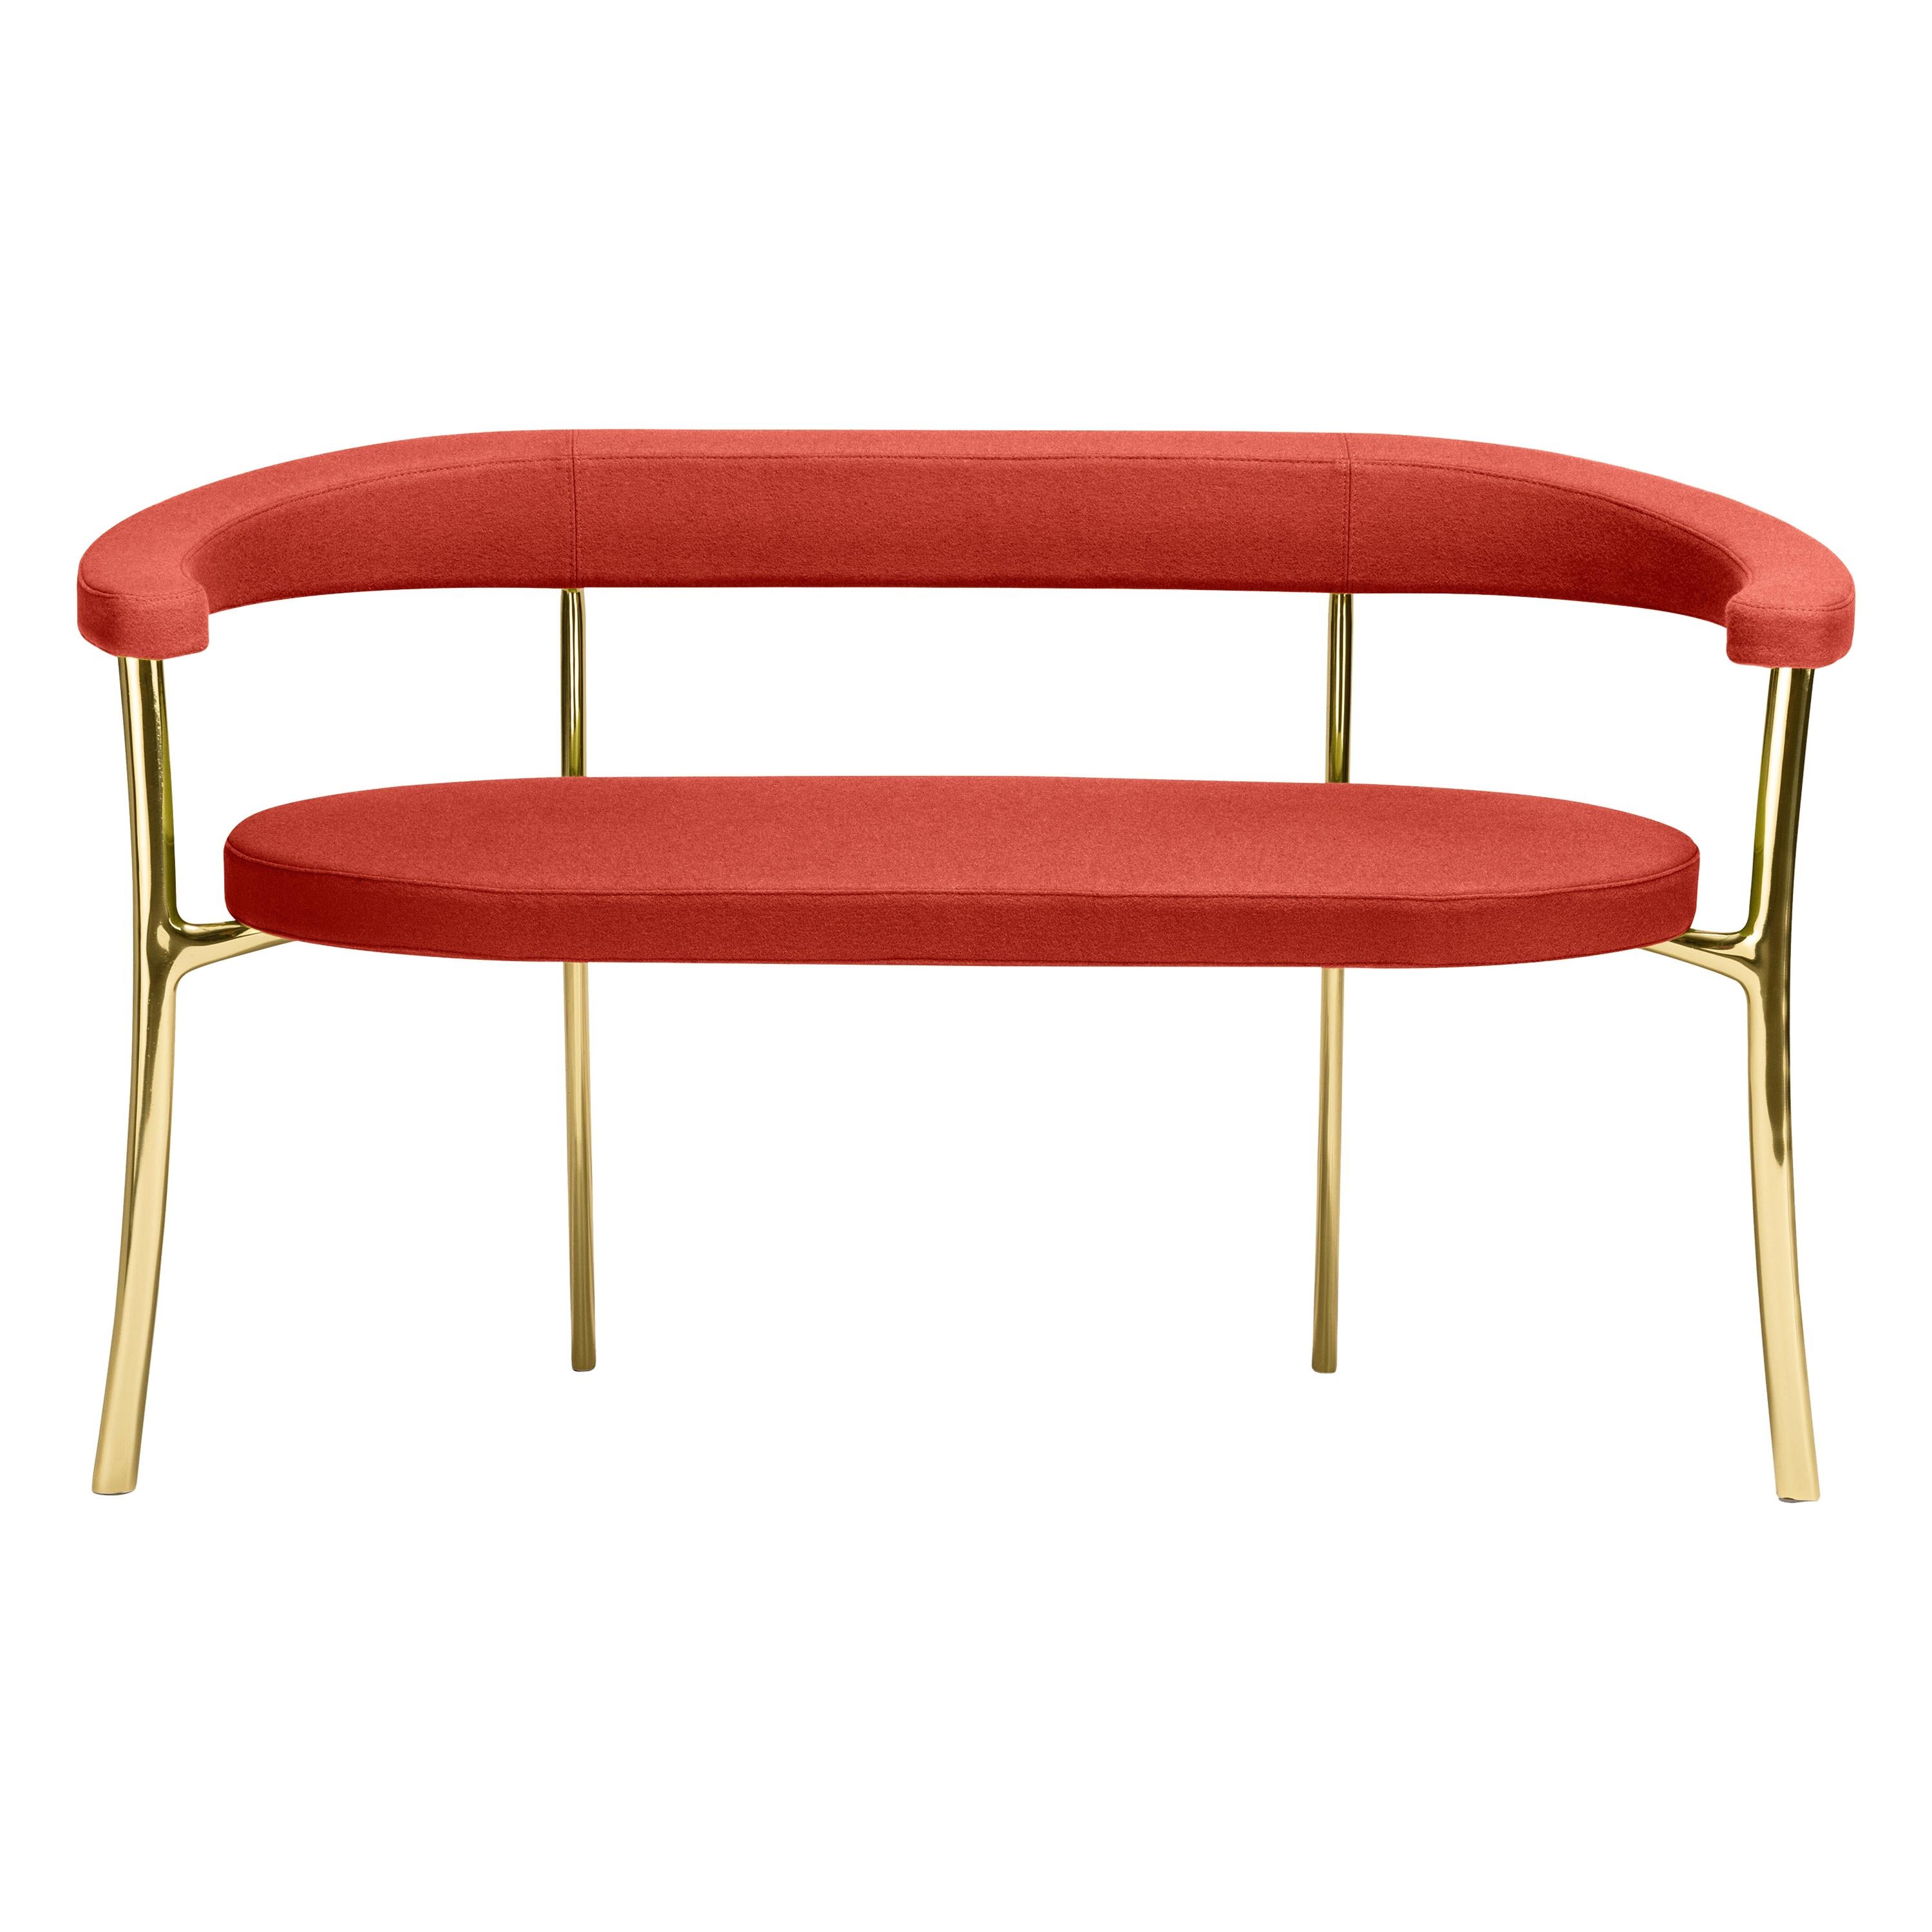 Katana Bench in Cadmium Red Fabric with Polished Brass by Paolo Rizzatto For Sale